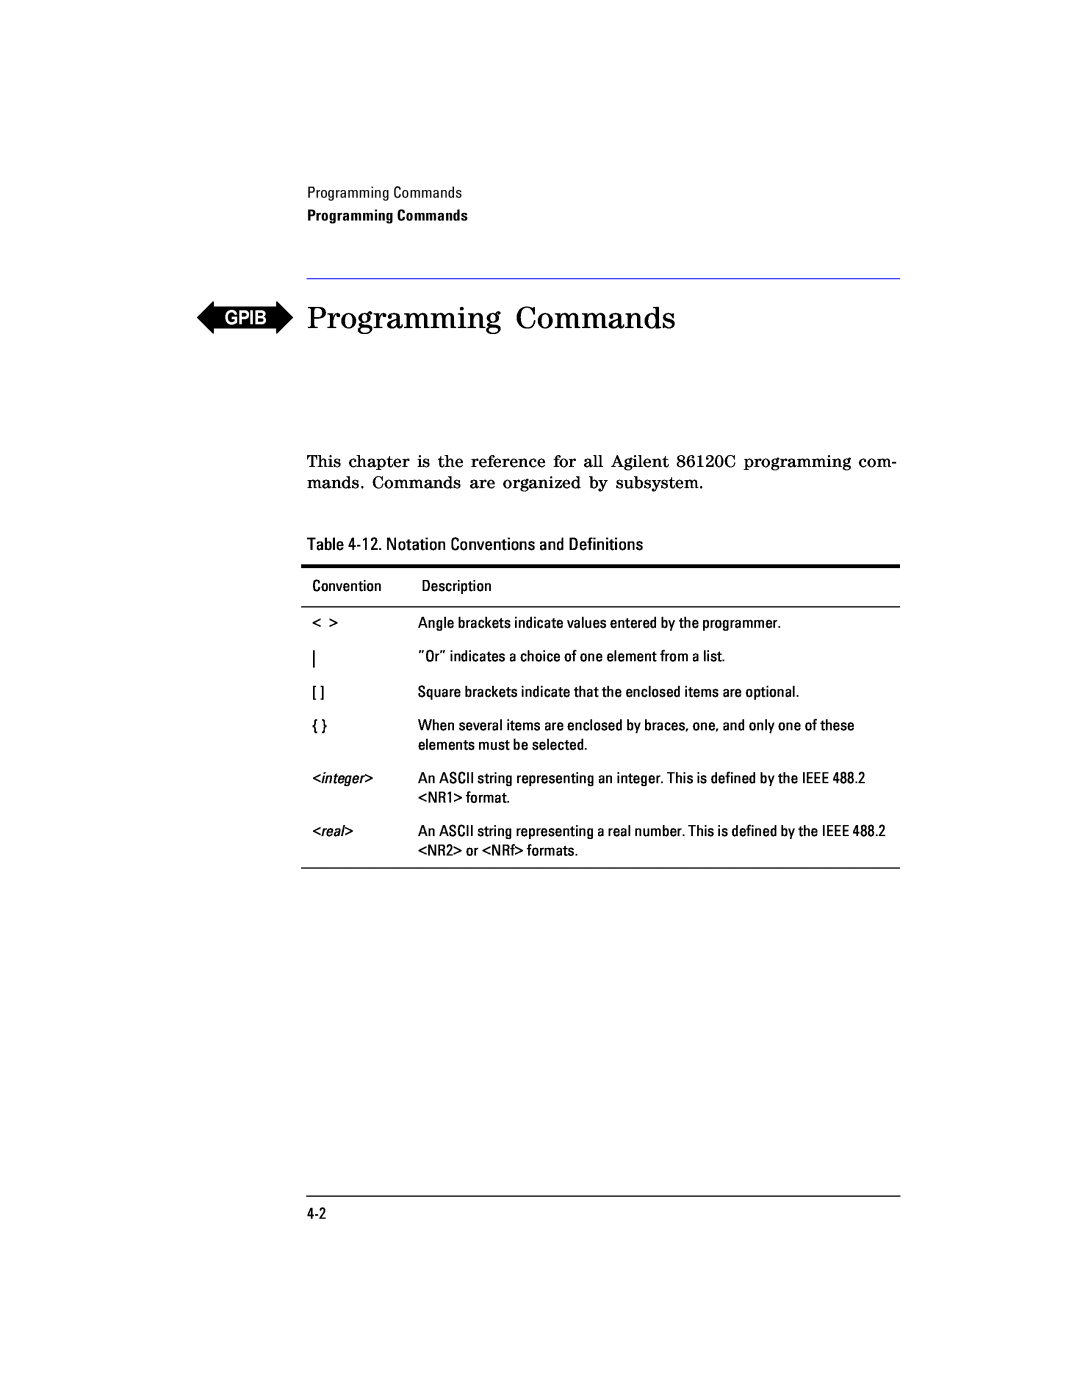 Agilent Technologies Agilent 86120C manual Programming Commands, 12. Notation Conventions and Definitions 